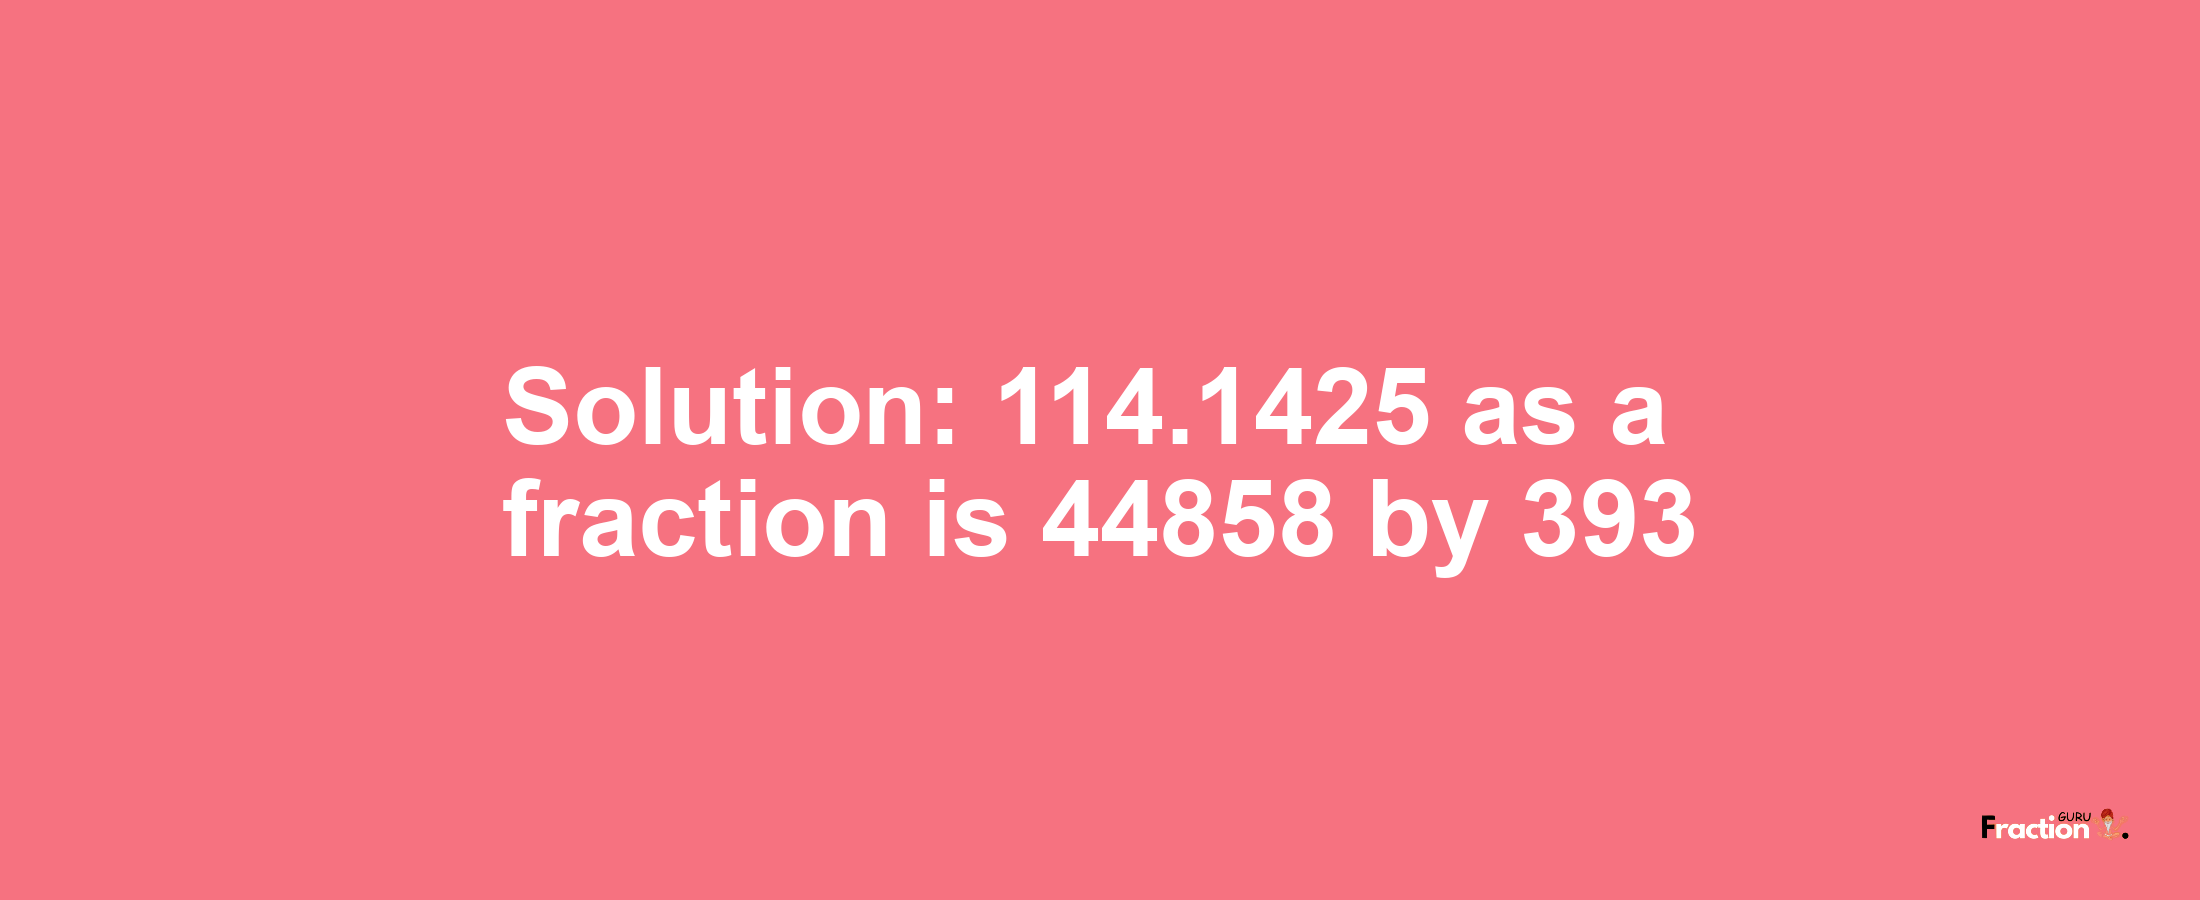 Solution:114.1425 as a fraction is 44858/393